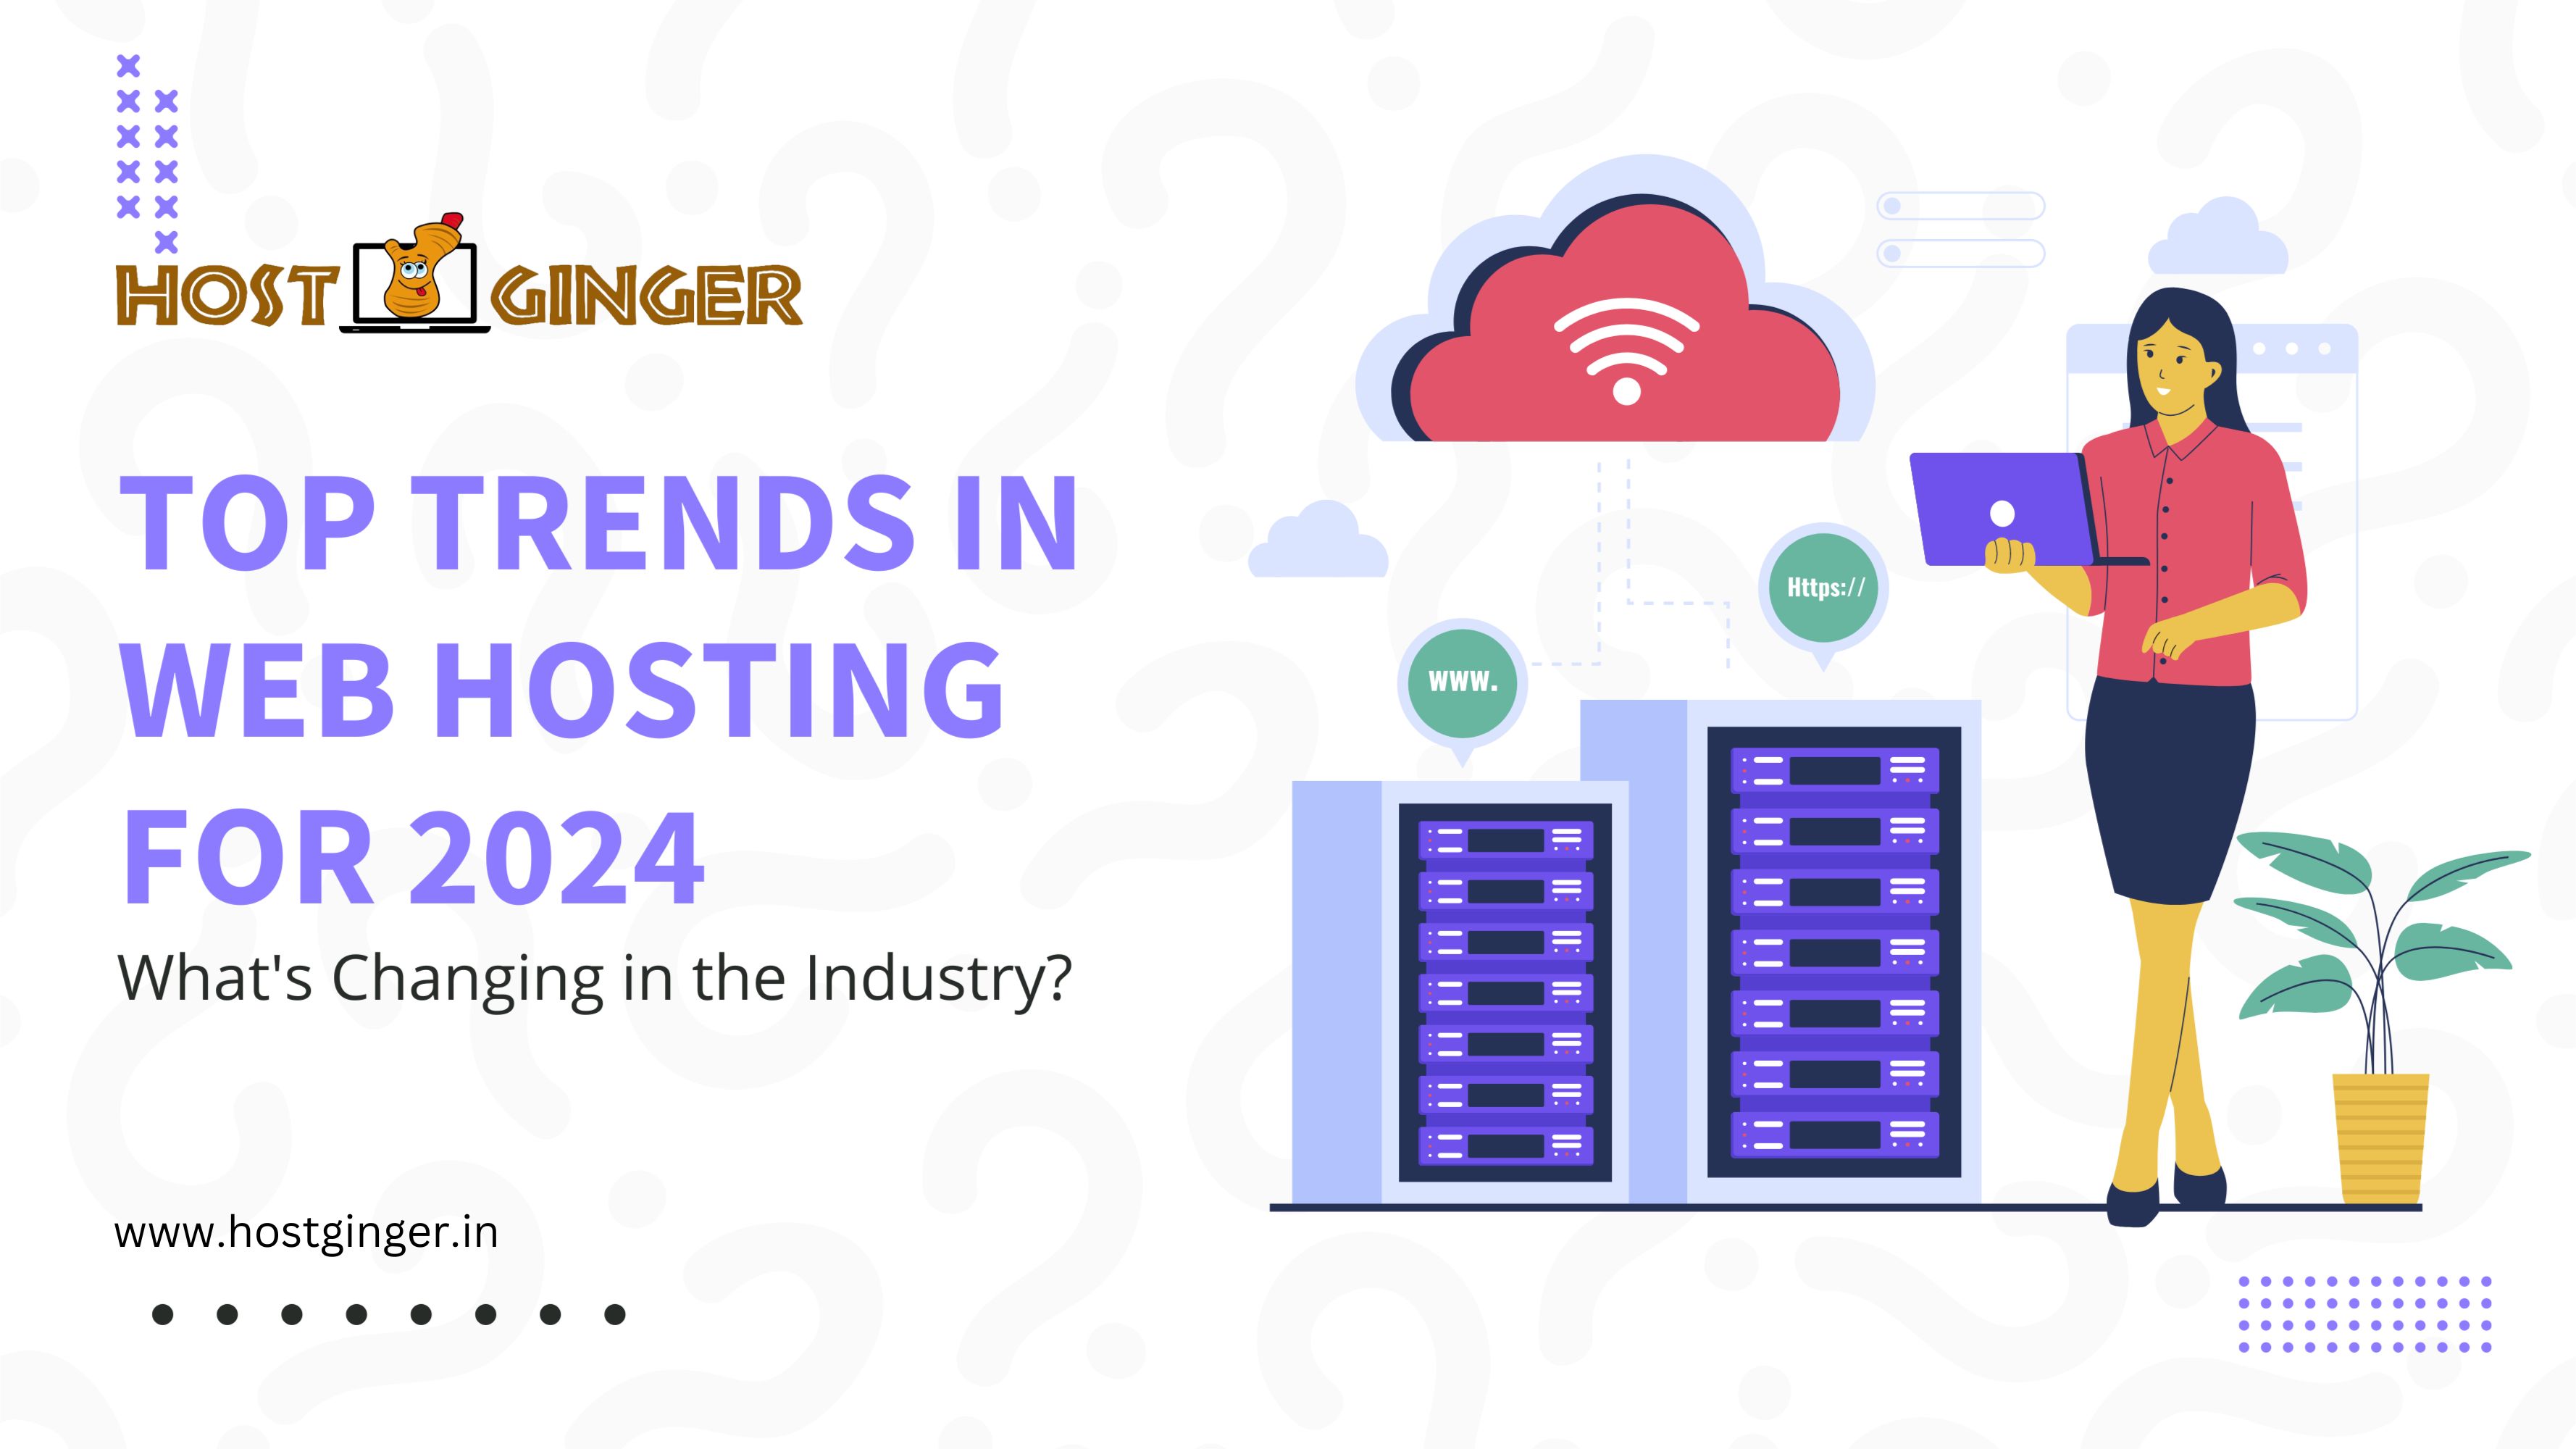 Top Trends in Web Hosting for 2024